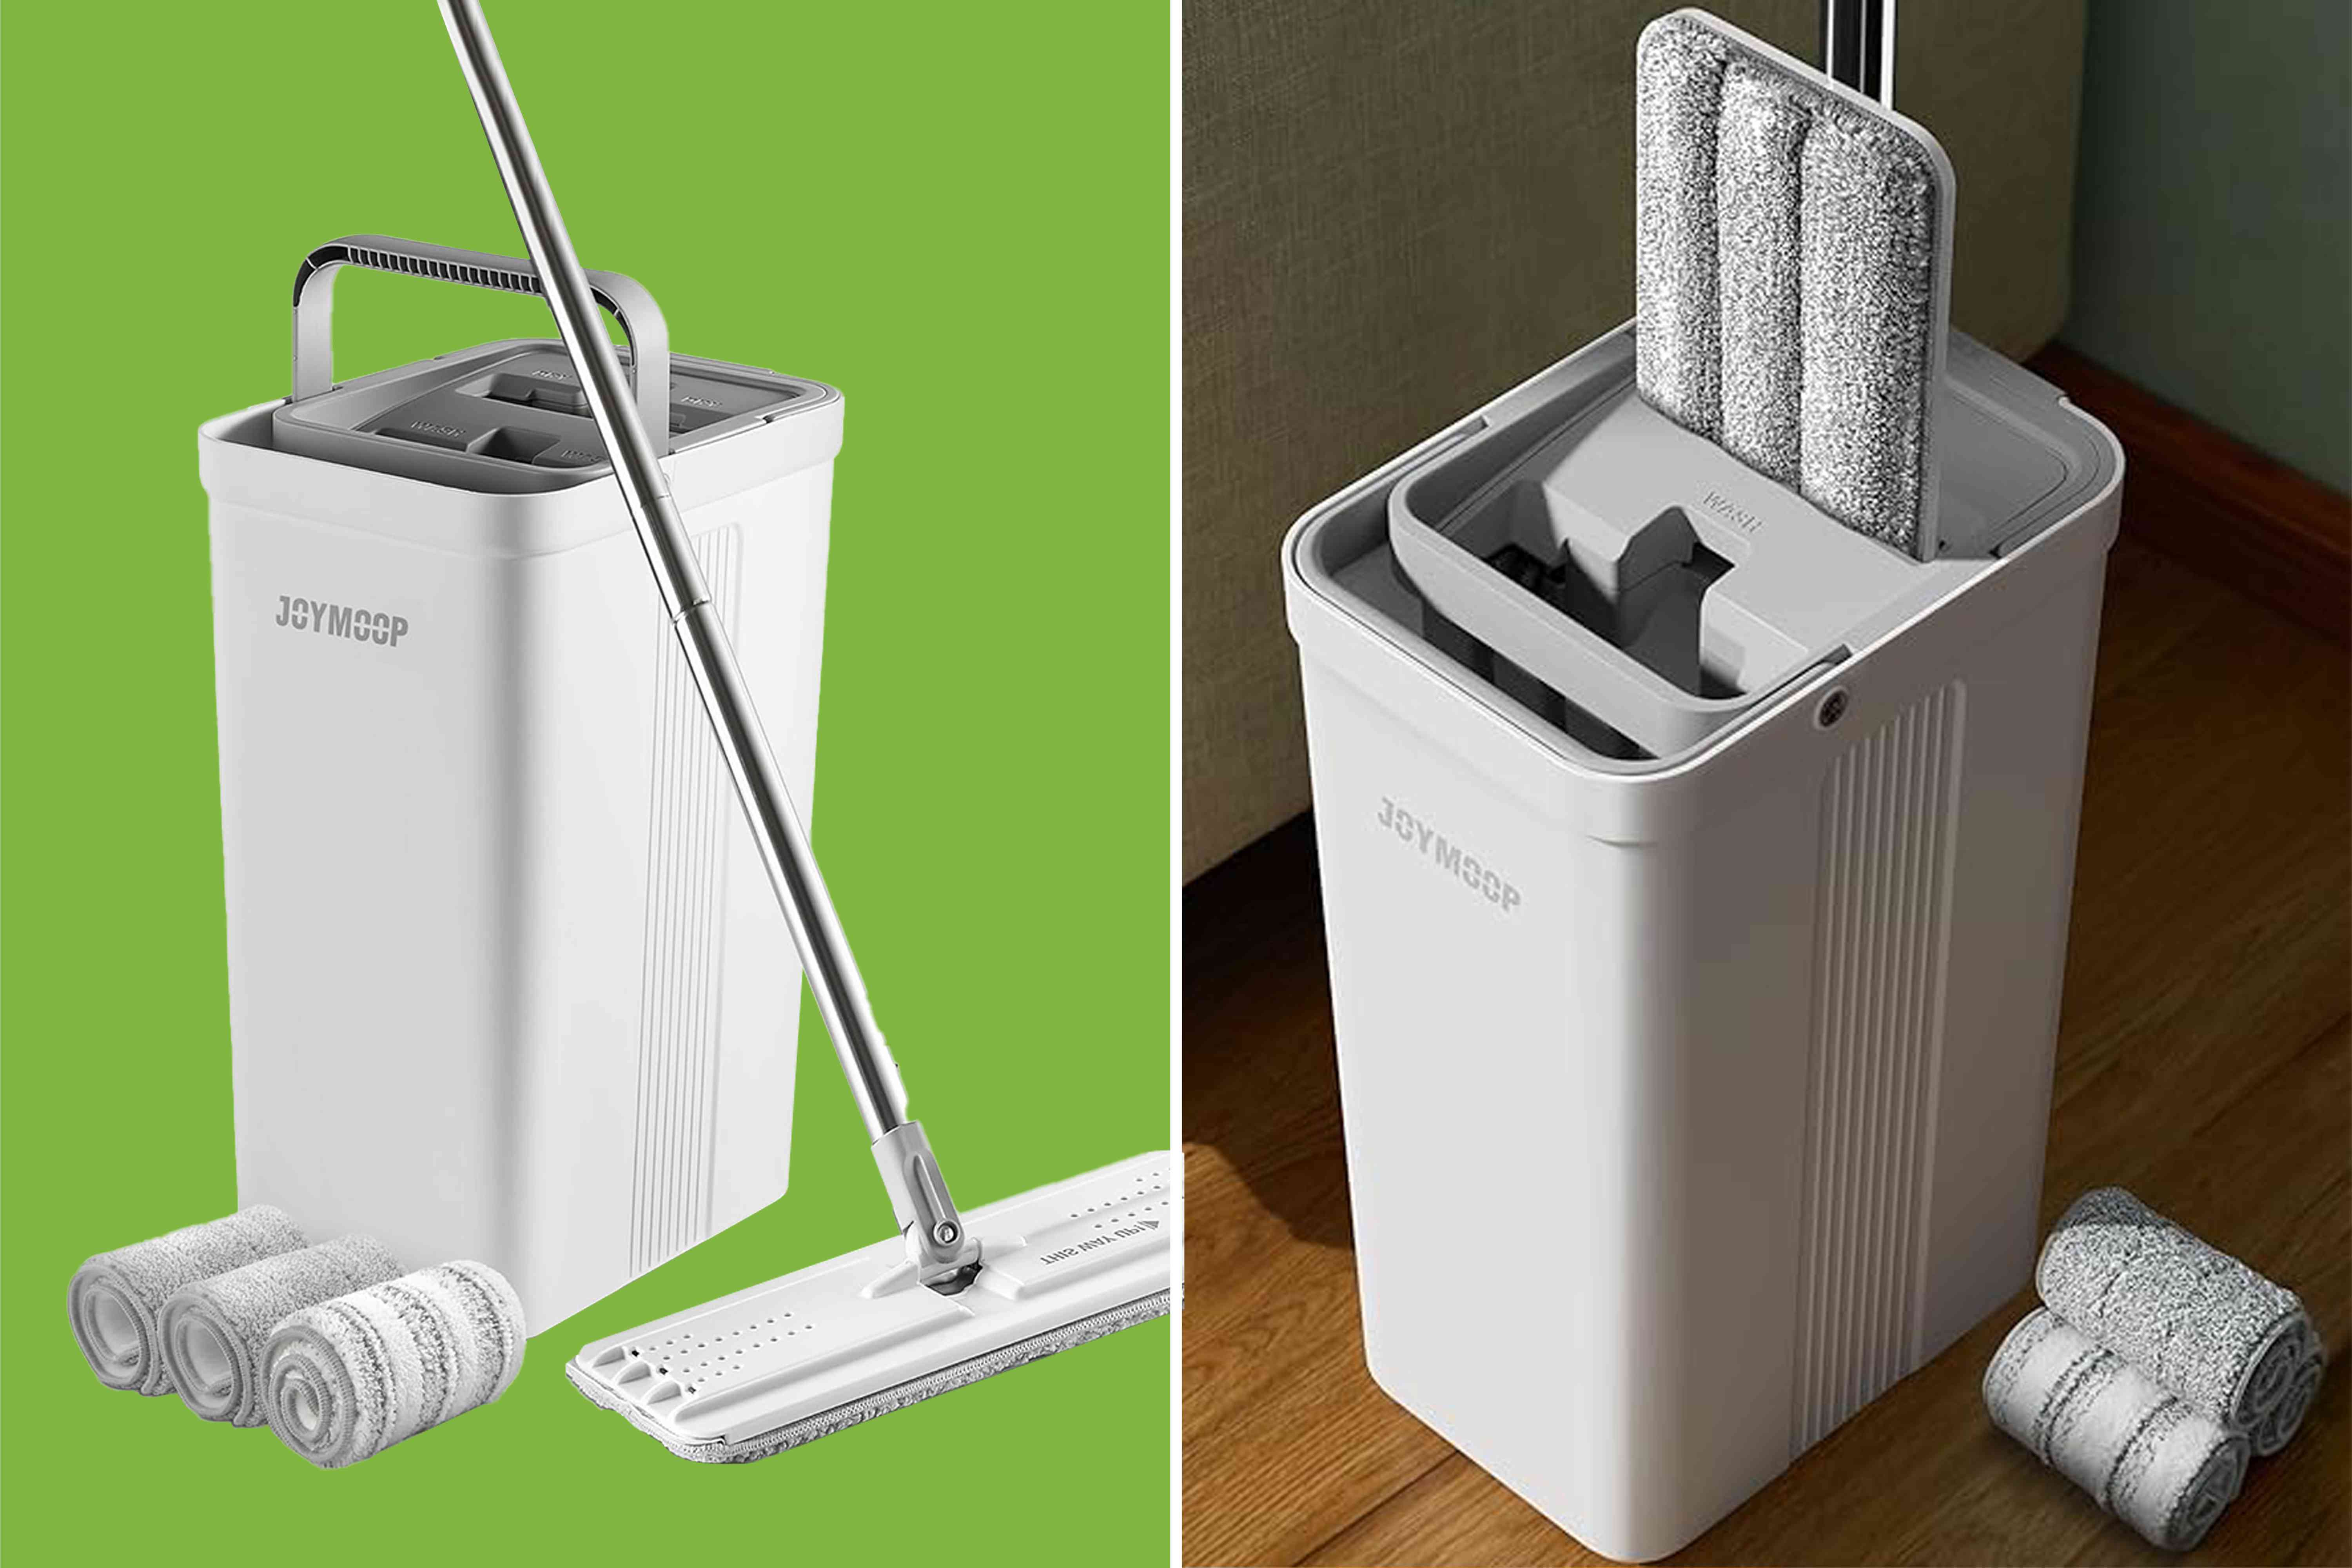 This Self-Cleaning Mop That Scrubs Floors in Just 2 Minutes Is 48% Off for Prime Members Today